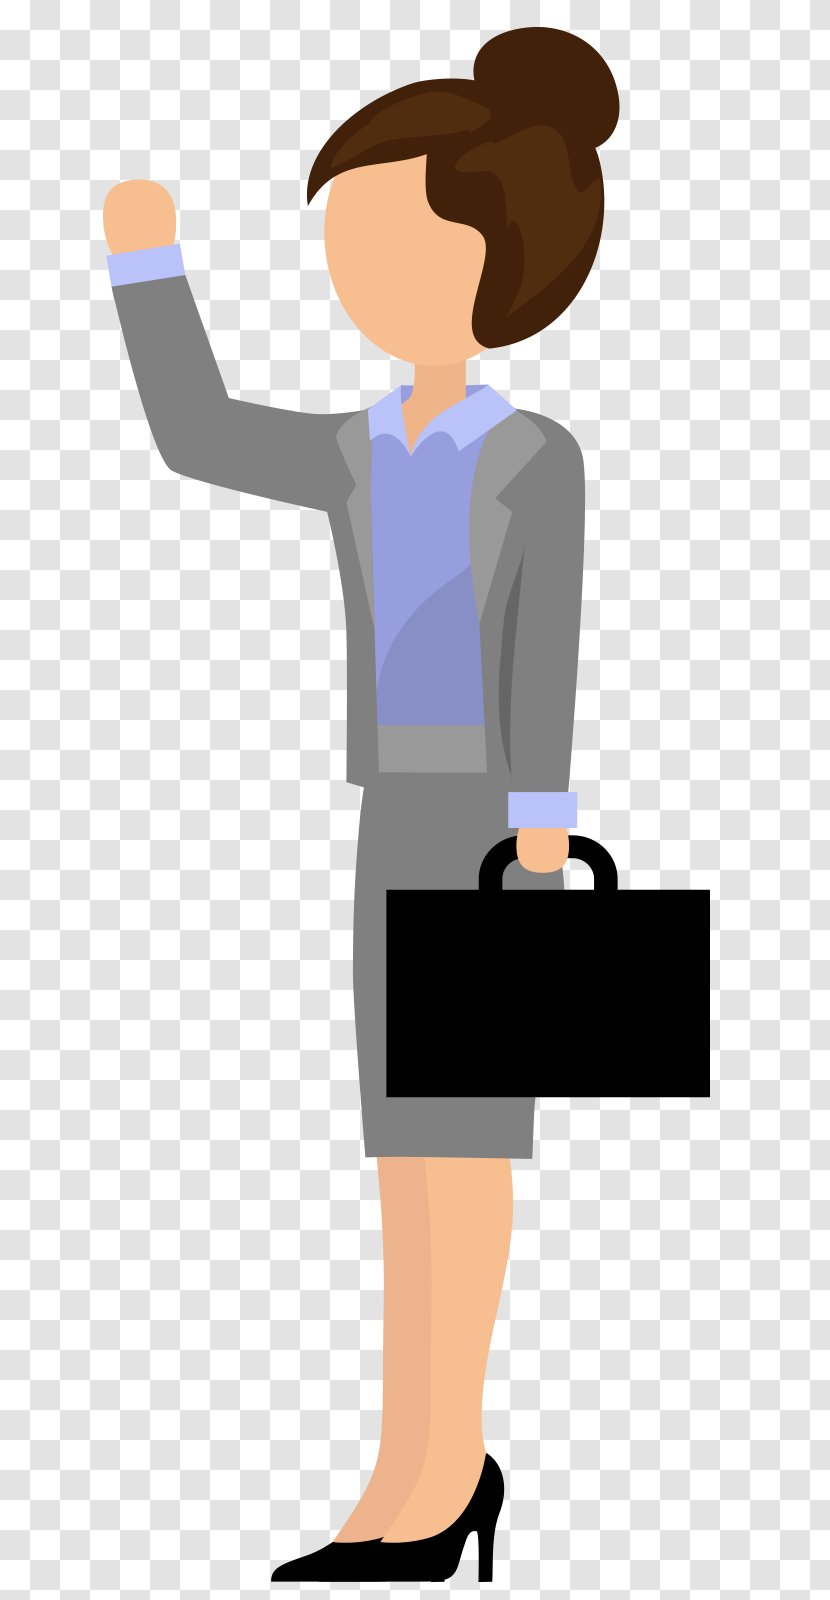 Woman Computer File - Cartoon - Holding The Hands Of Women Transparent PNG